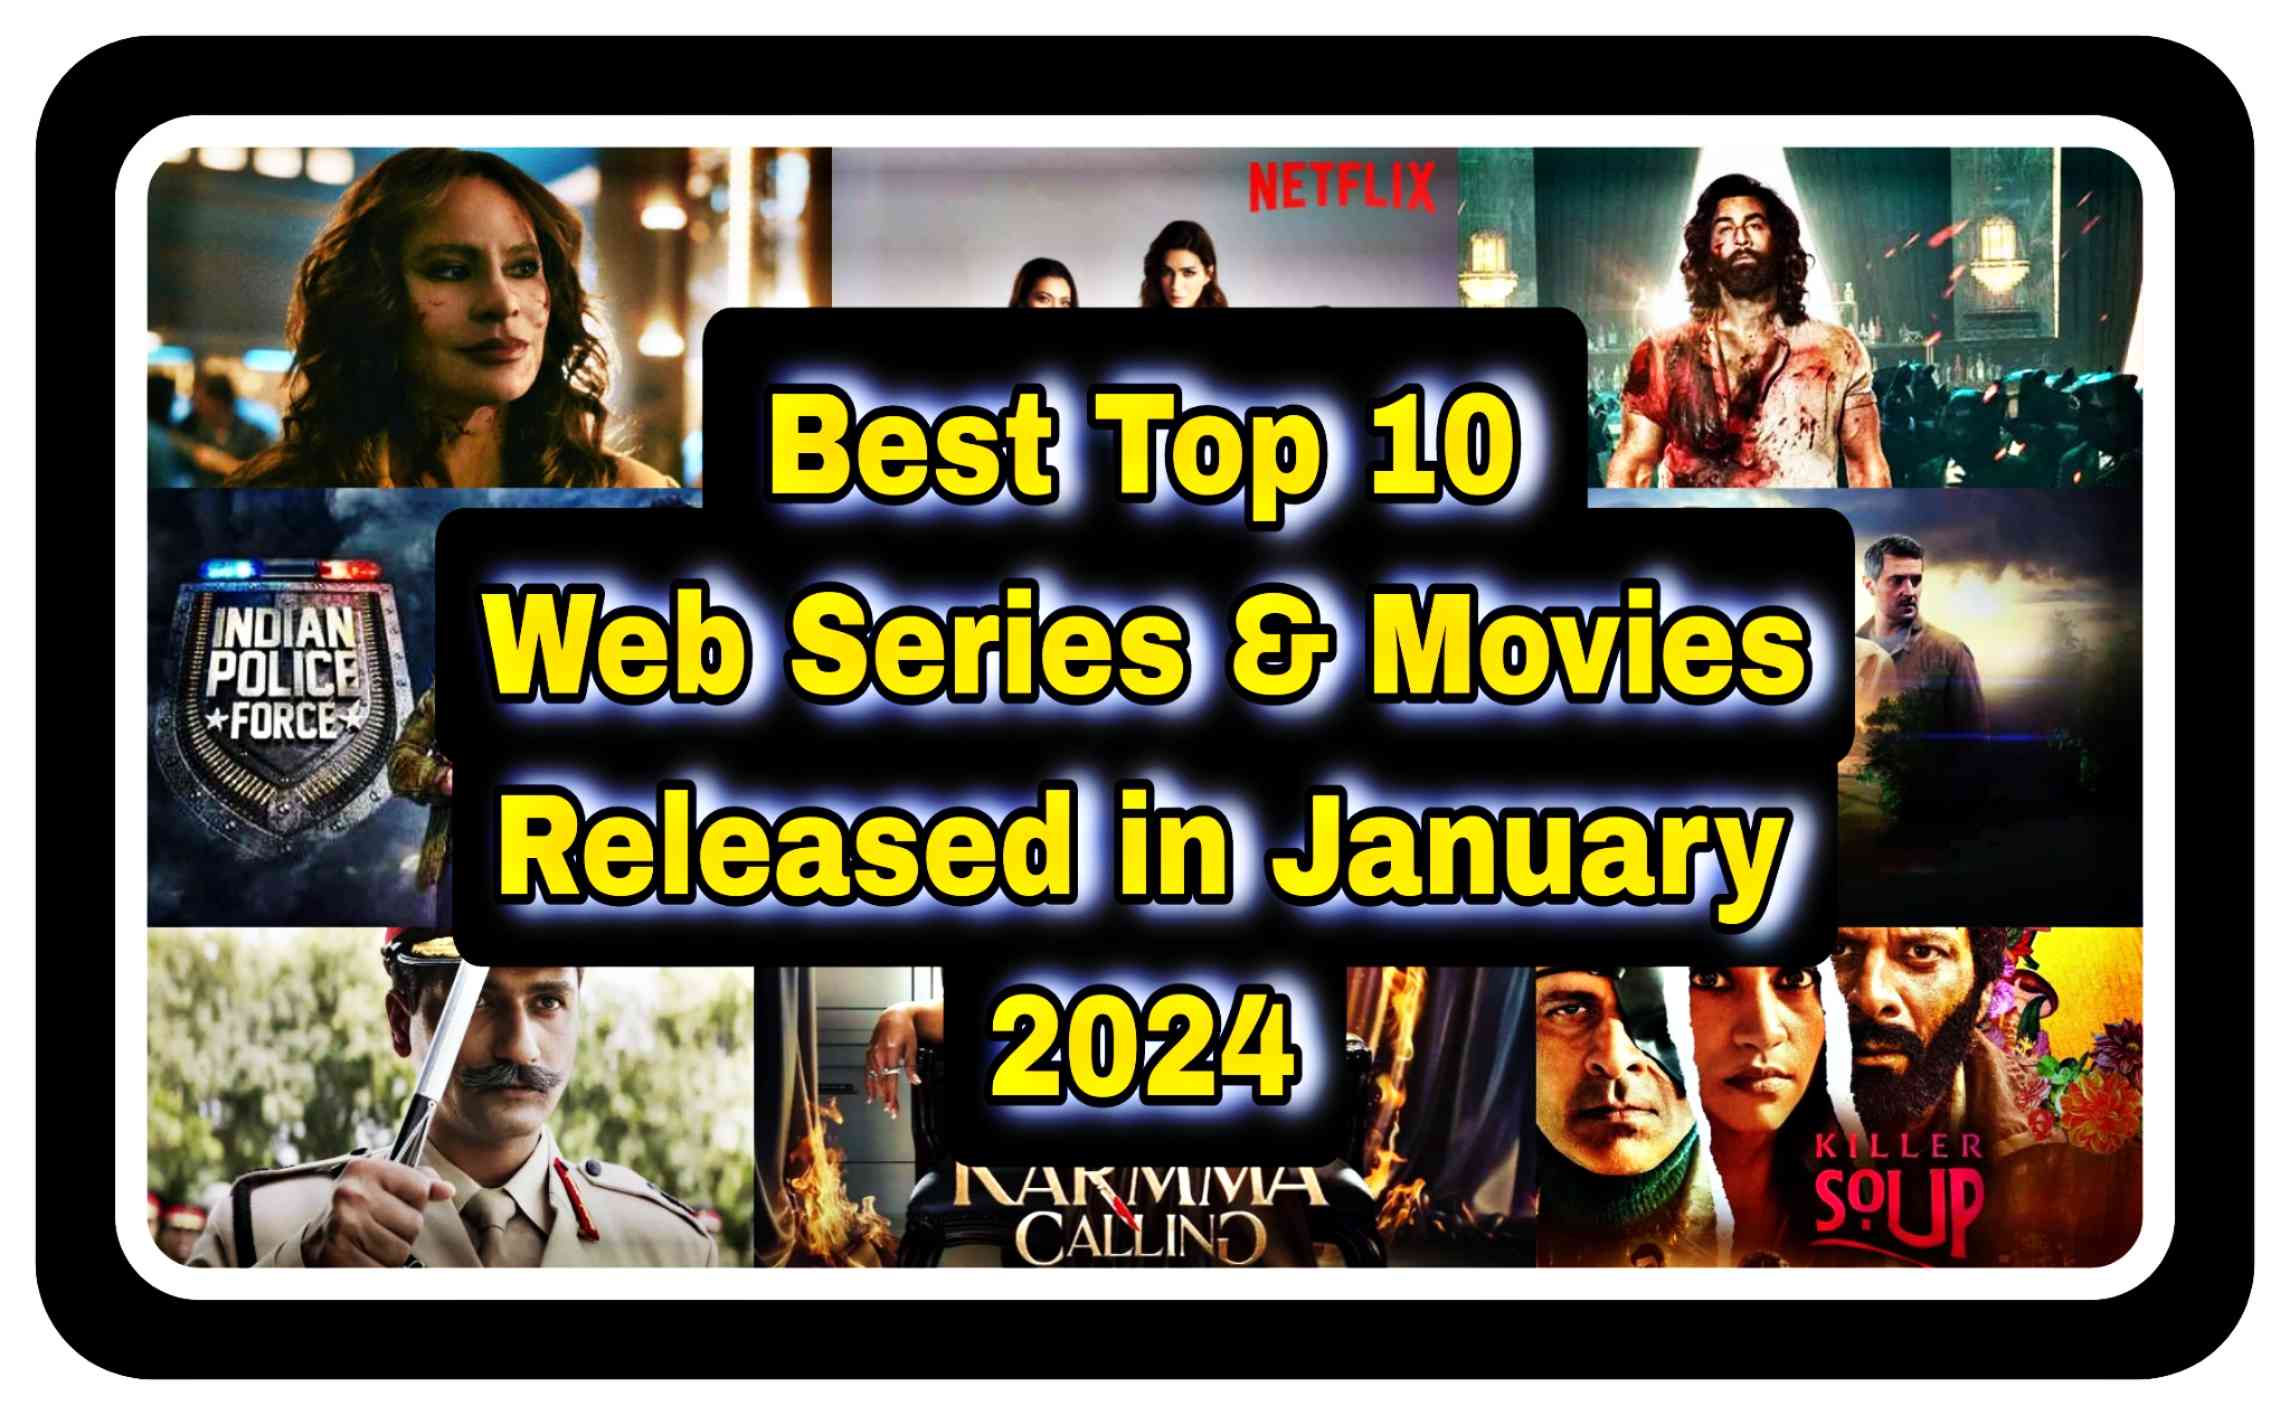 Best Top 10 Web Series and Movies